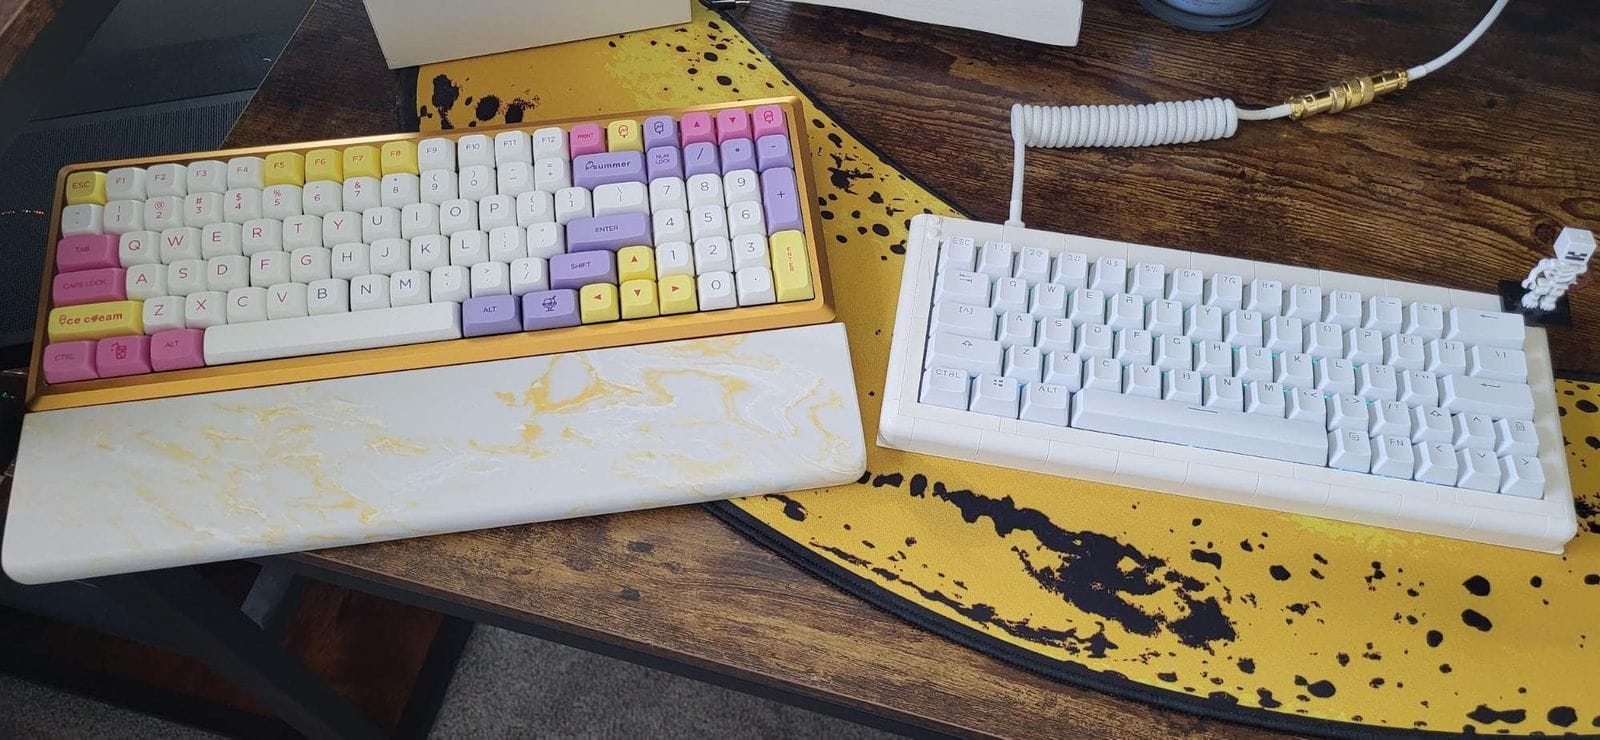 A desk setup featuring two mechanical keyboards; the left keyboard has a gold case with pastel NP PBT Ice Cream keycaps, and the right keyboard is white with YMDK Double Shot Shine Through keycaps